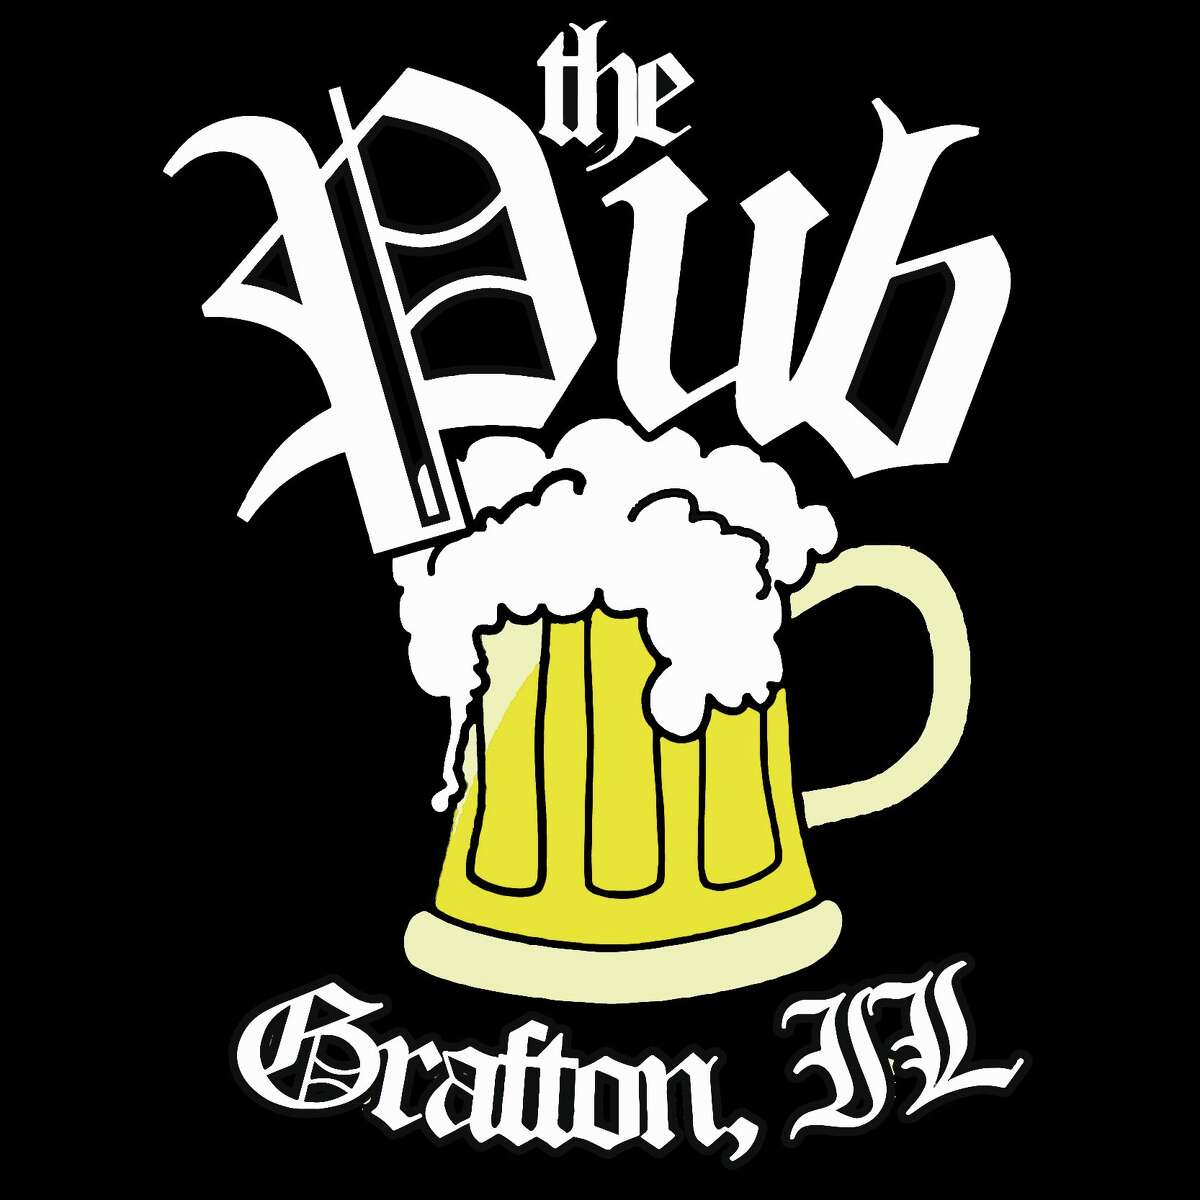 The Grafton Pub, 225 W. main St., will host a Shortest Day of the Year party at 6:30 p.m. Tuesday, Dec. 21.